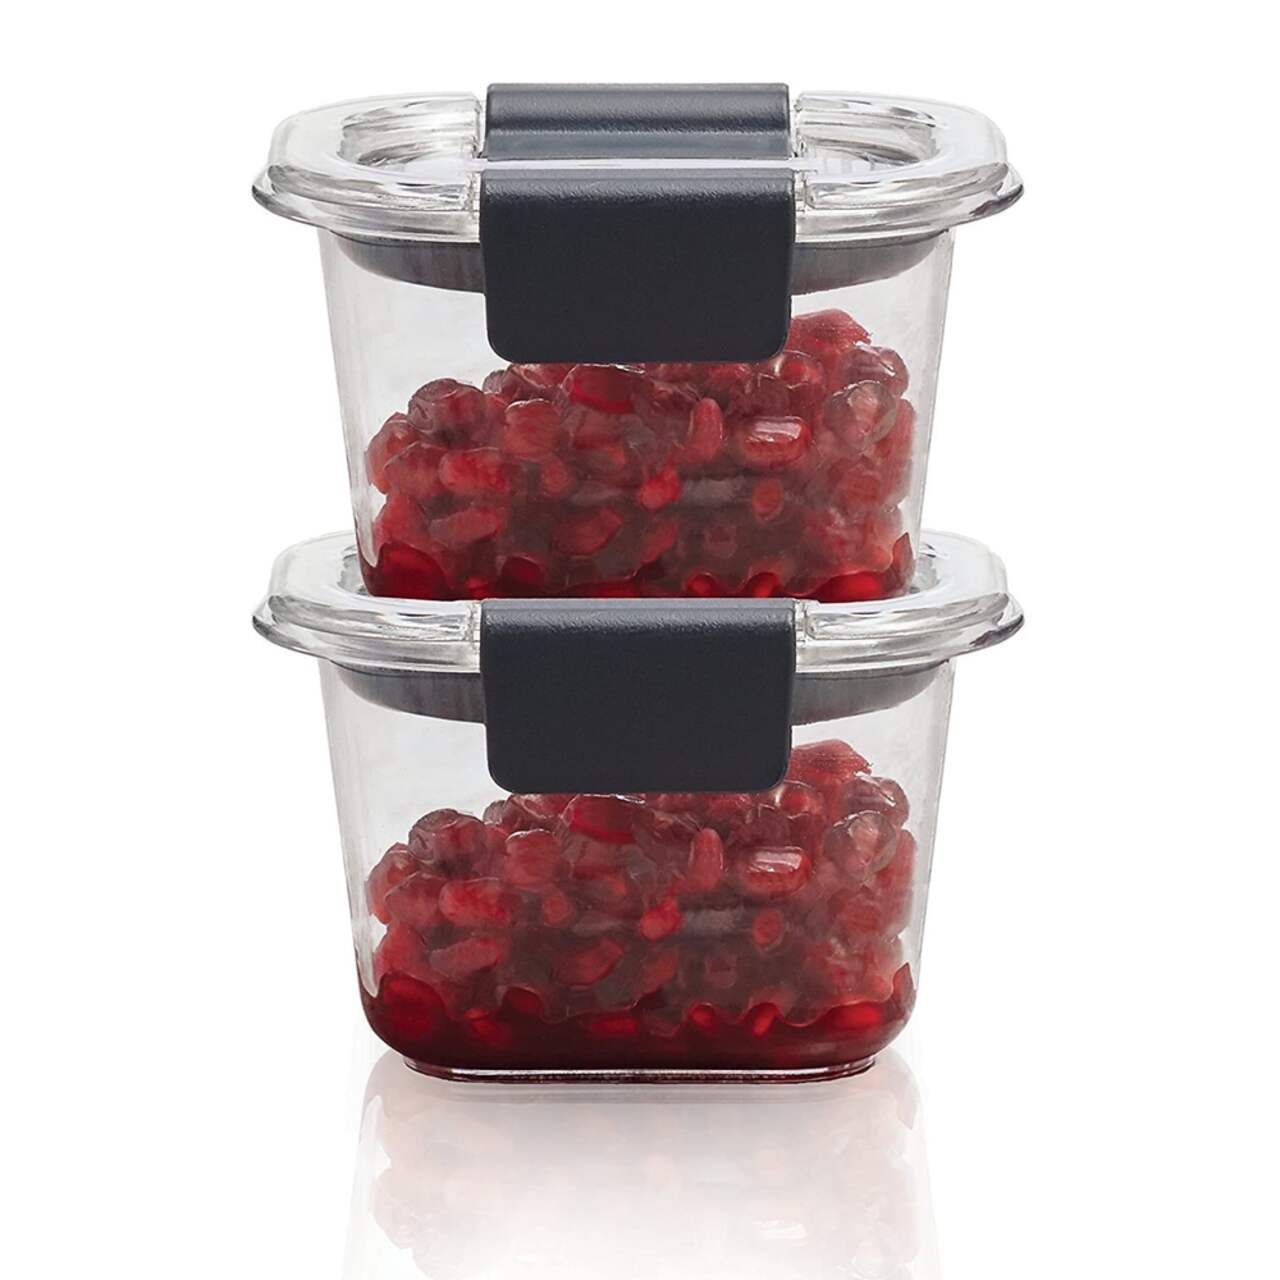 OXO Divided Food Storage Container with Watertight Lid, 2-Cup/500